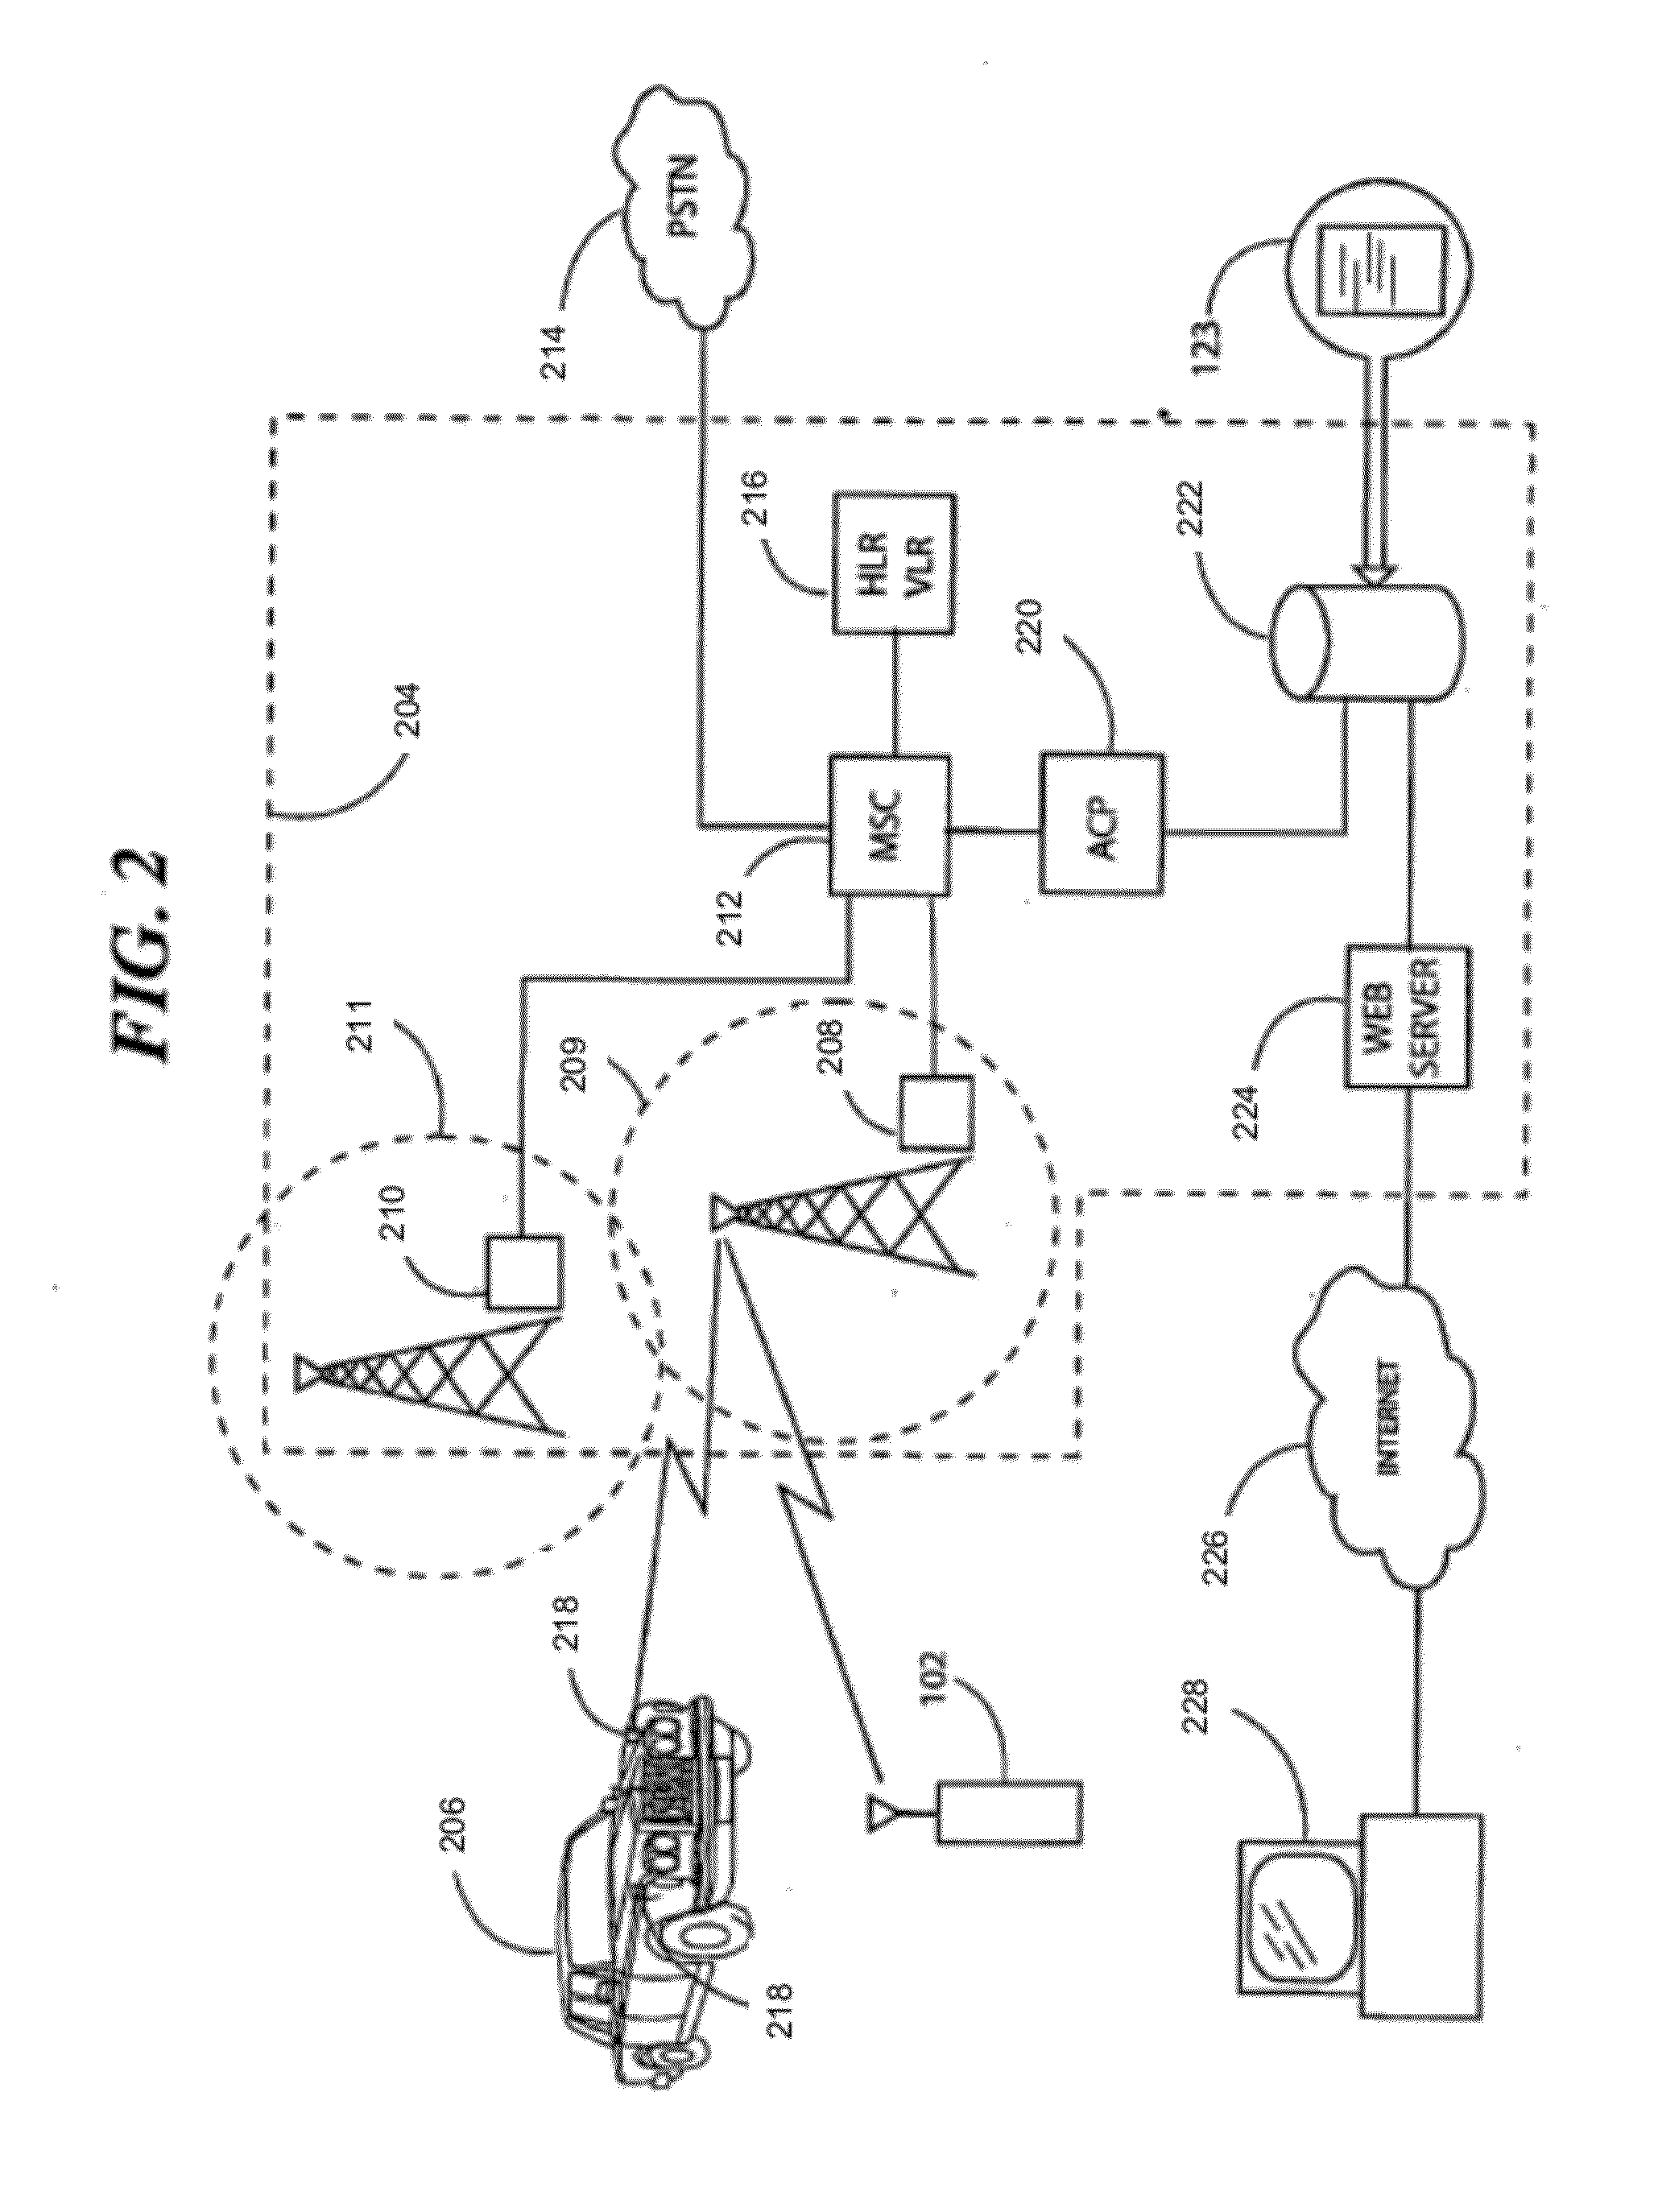 Systems and methods for selectively invoking positioning systems for mobile device control applications using wireless network measurements